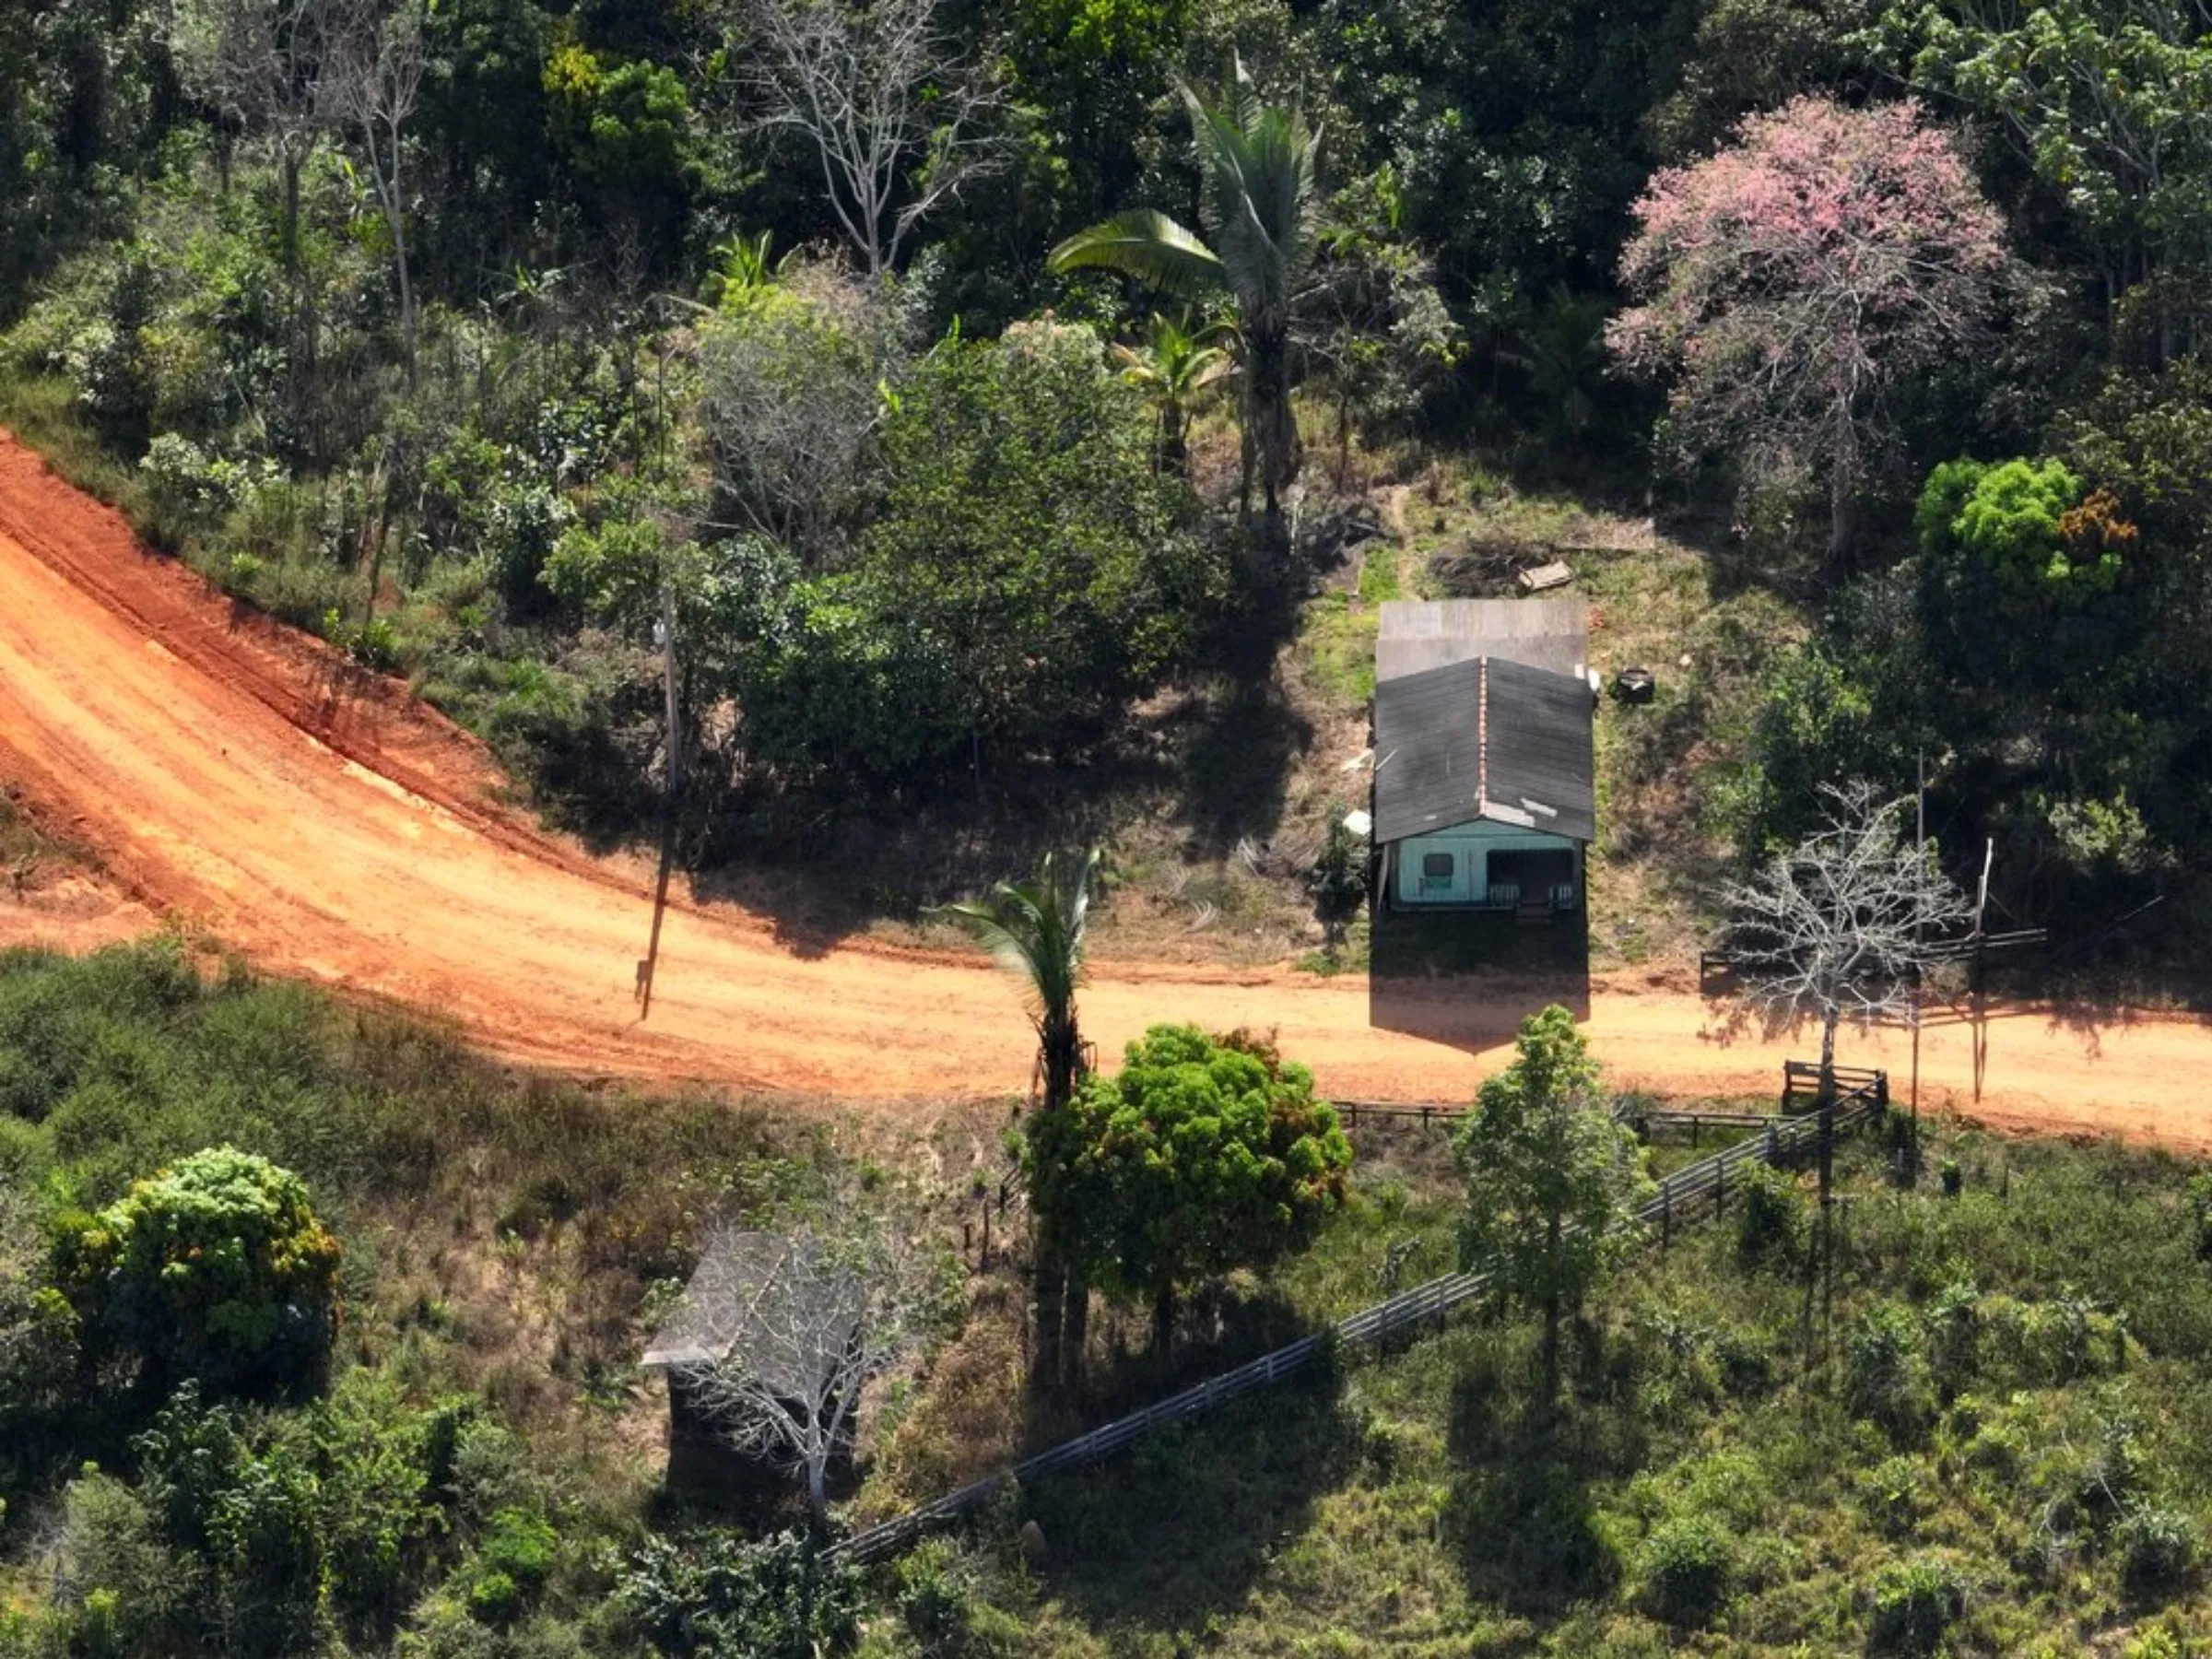 An aerial view of the entrance to land that used to belong to the Florestal Santa Maria project, but is now owned by Junp Madeiras, a logging company in Colniza, in the state of Mato Grosso, Brazil, May 30, 2022